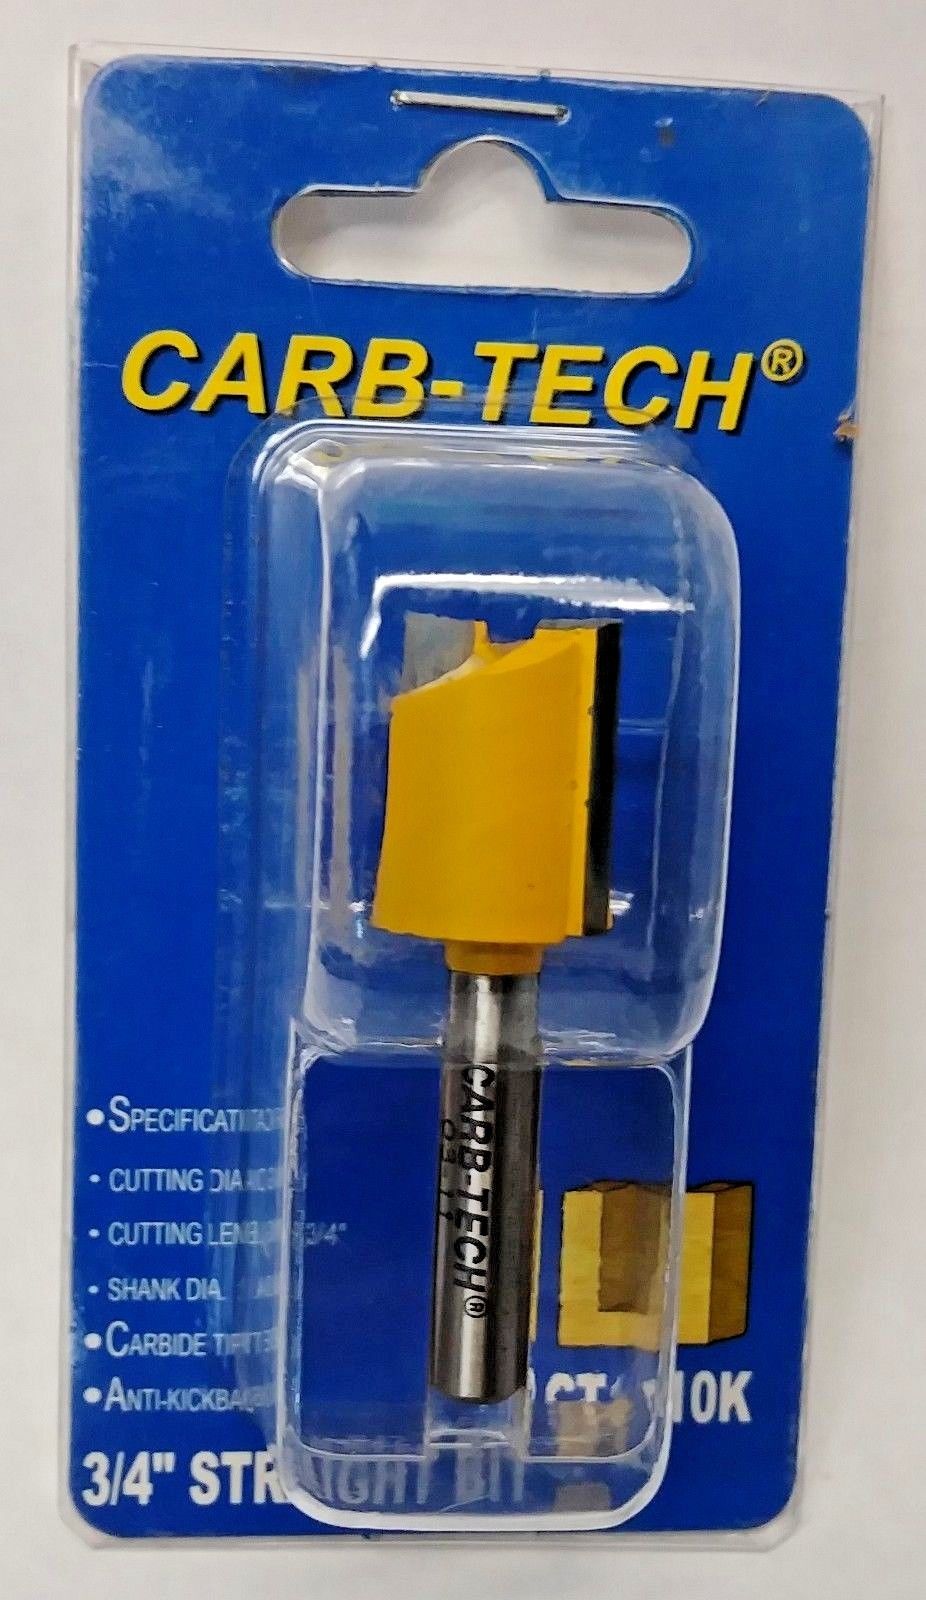 Carb-Tech CT1010K 3/4" Carbide Tipped Straight Router Bit